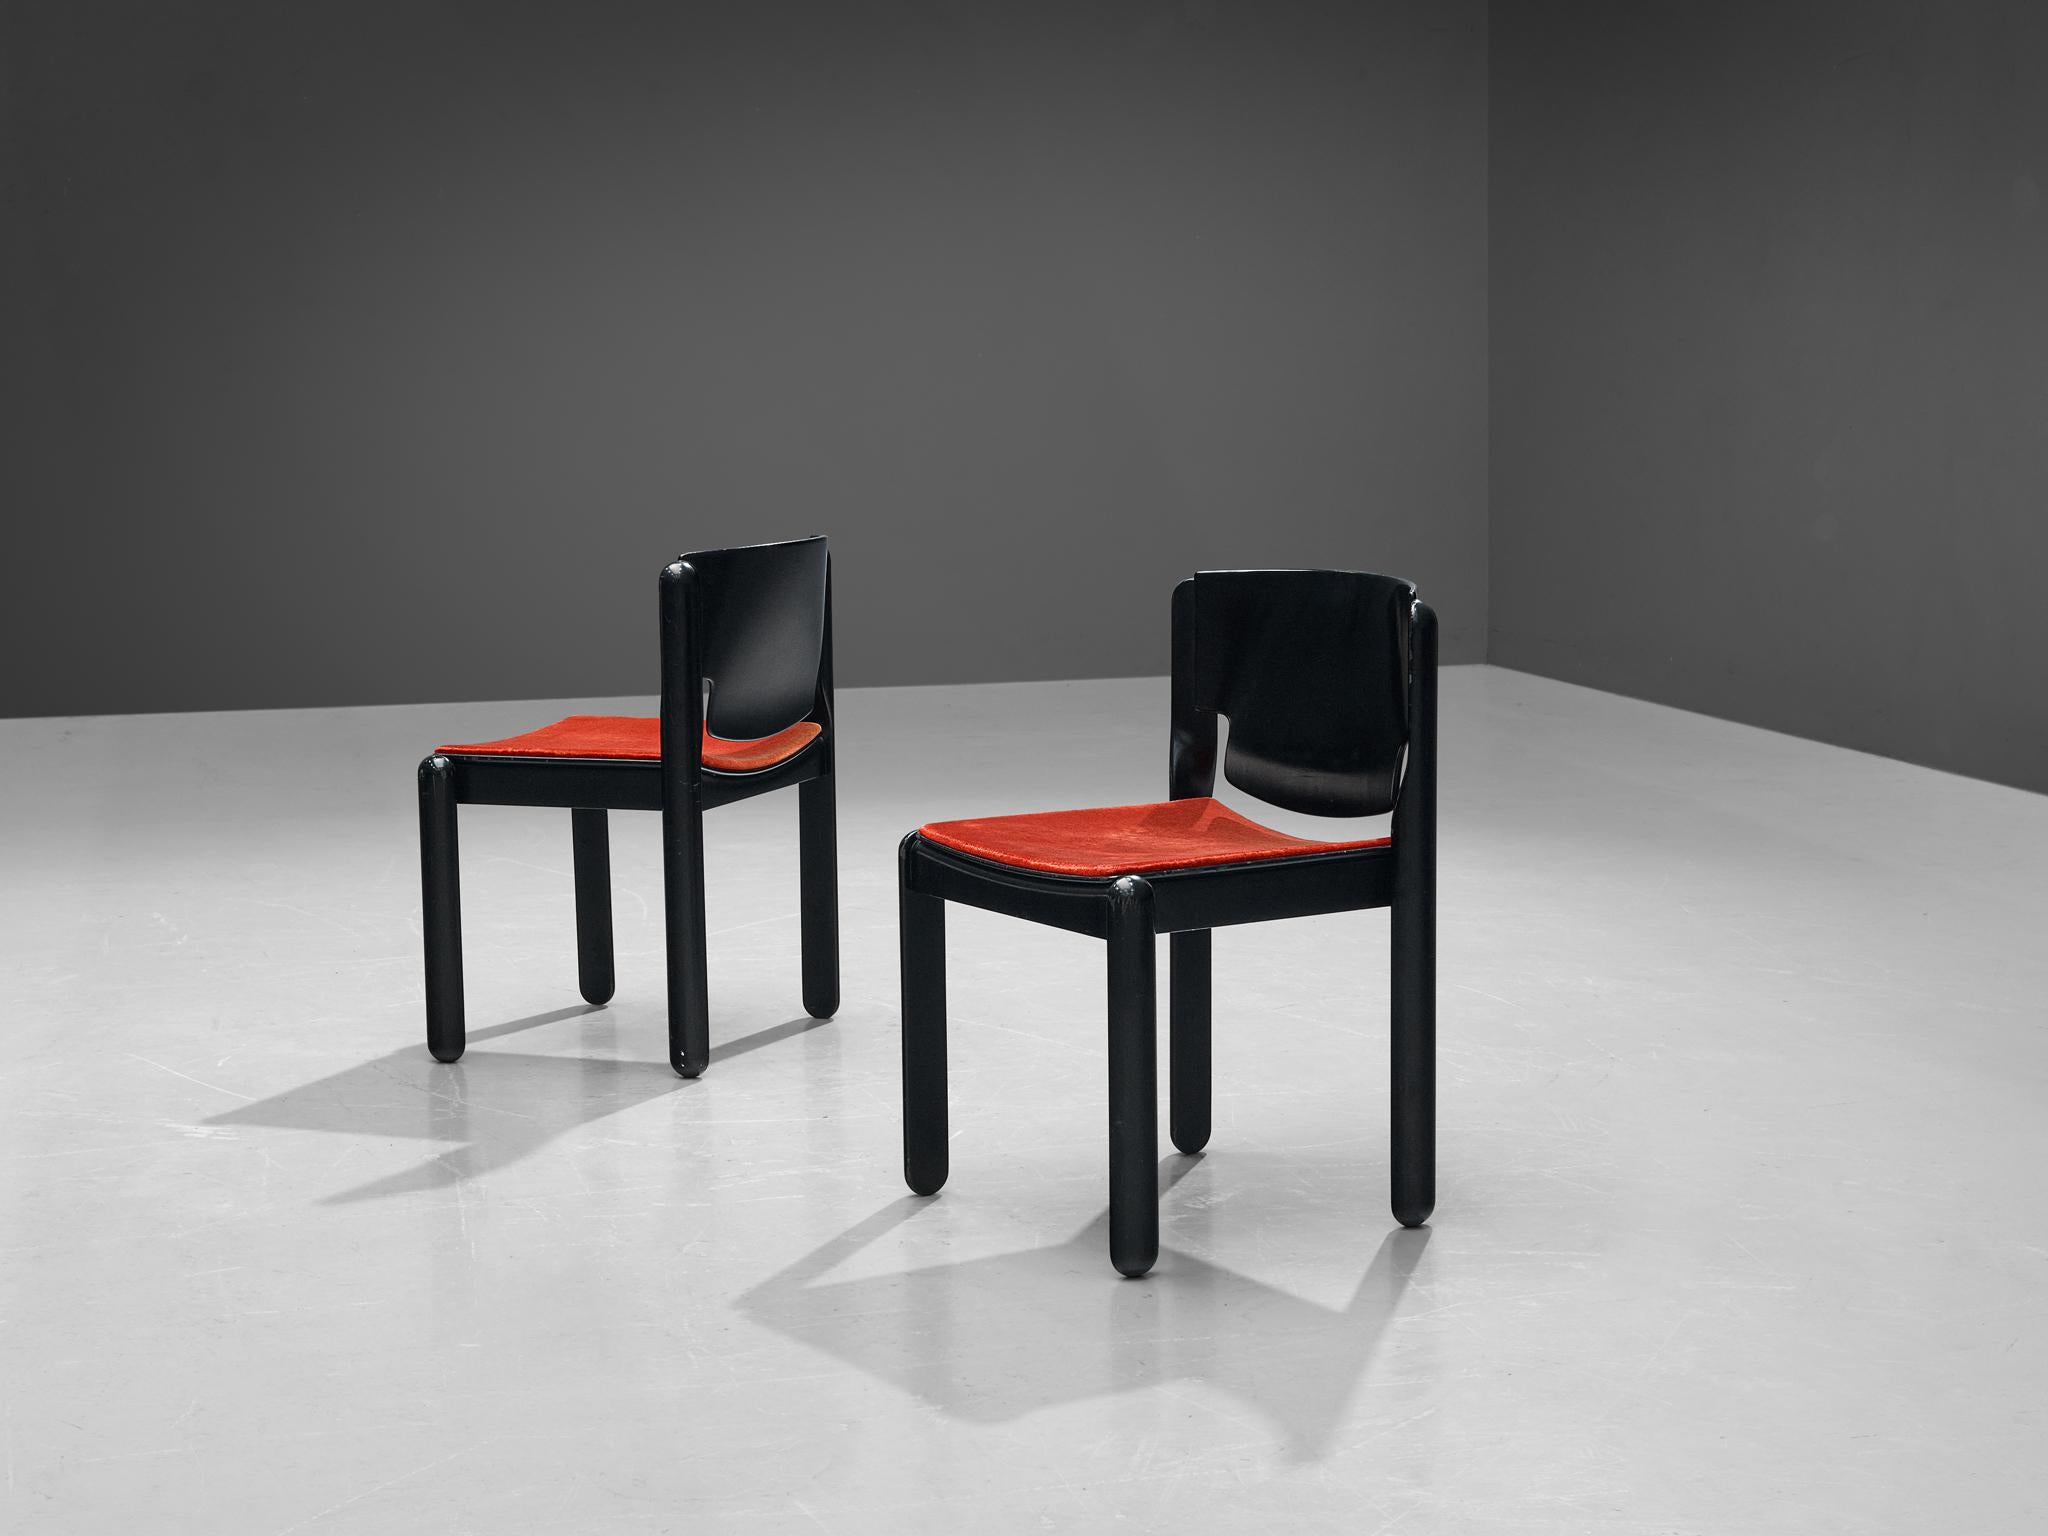 Vico Magistretti for Cassina, set of twelve chairs model '122', curved plywood, red velvet, Italy, 1967

This Italian chairs feature a remarkable sculpted back that is beautifully curved on both sides, resulting in an expansion at the bottom. The